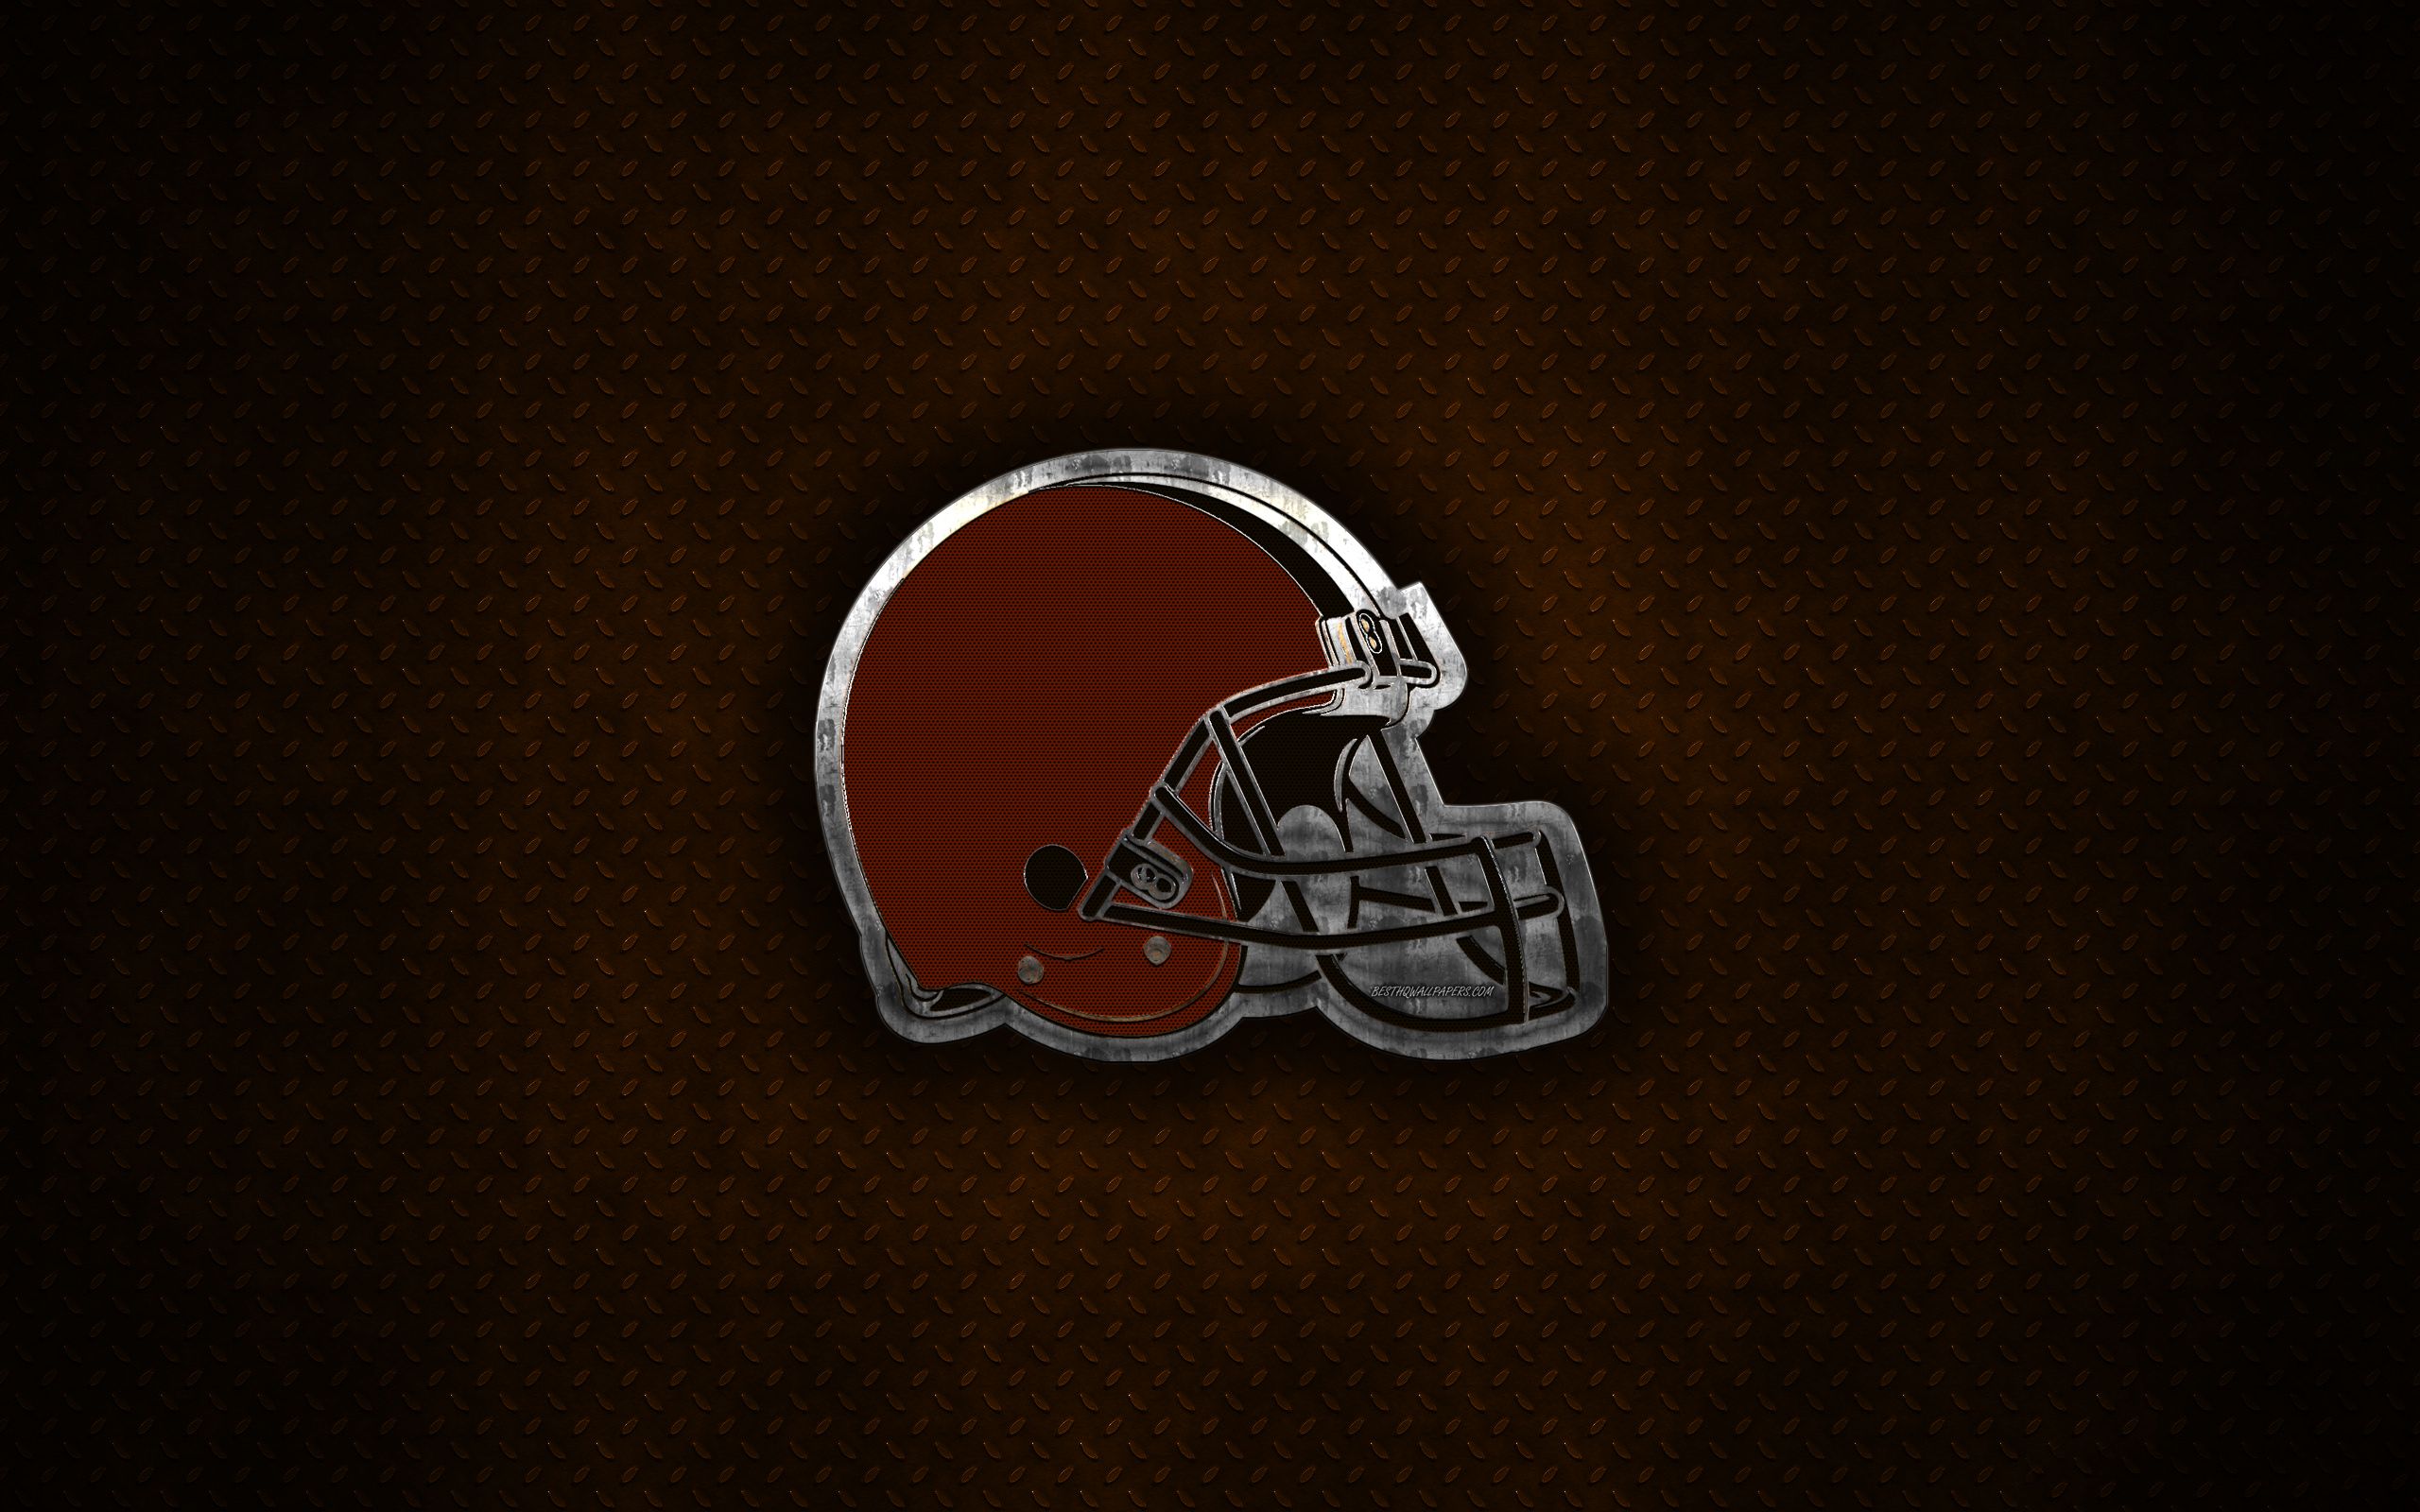 Download wallpaper Cleveland Browns, American football club, metal logo, Cleveland, Ohio, USA, creative art, NFL, emblem, brown metal background, American football, National Football League for desktop with resolution 2560x1600. High Quality HD